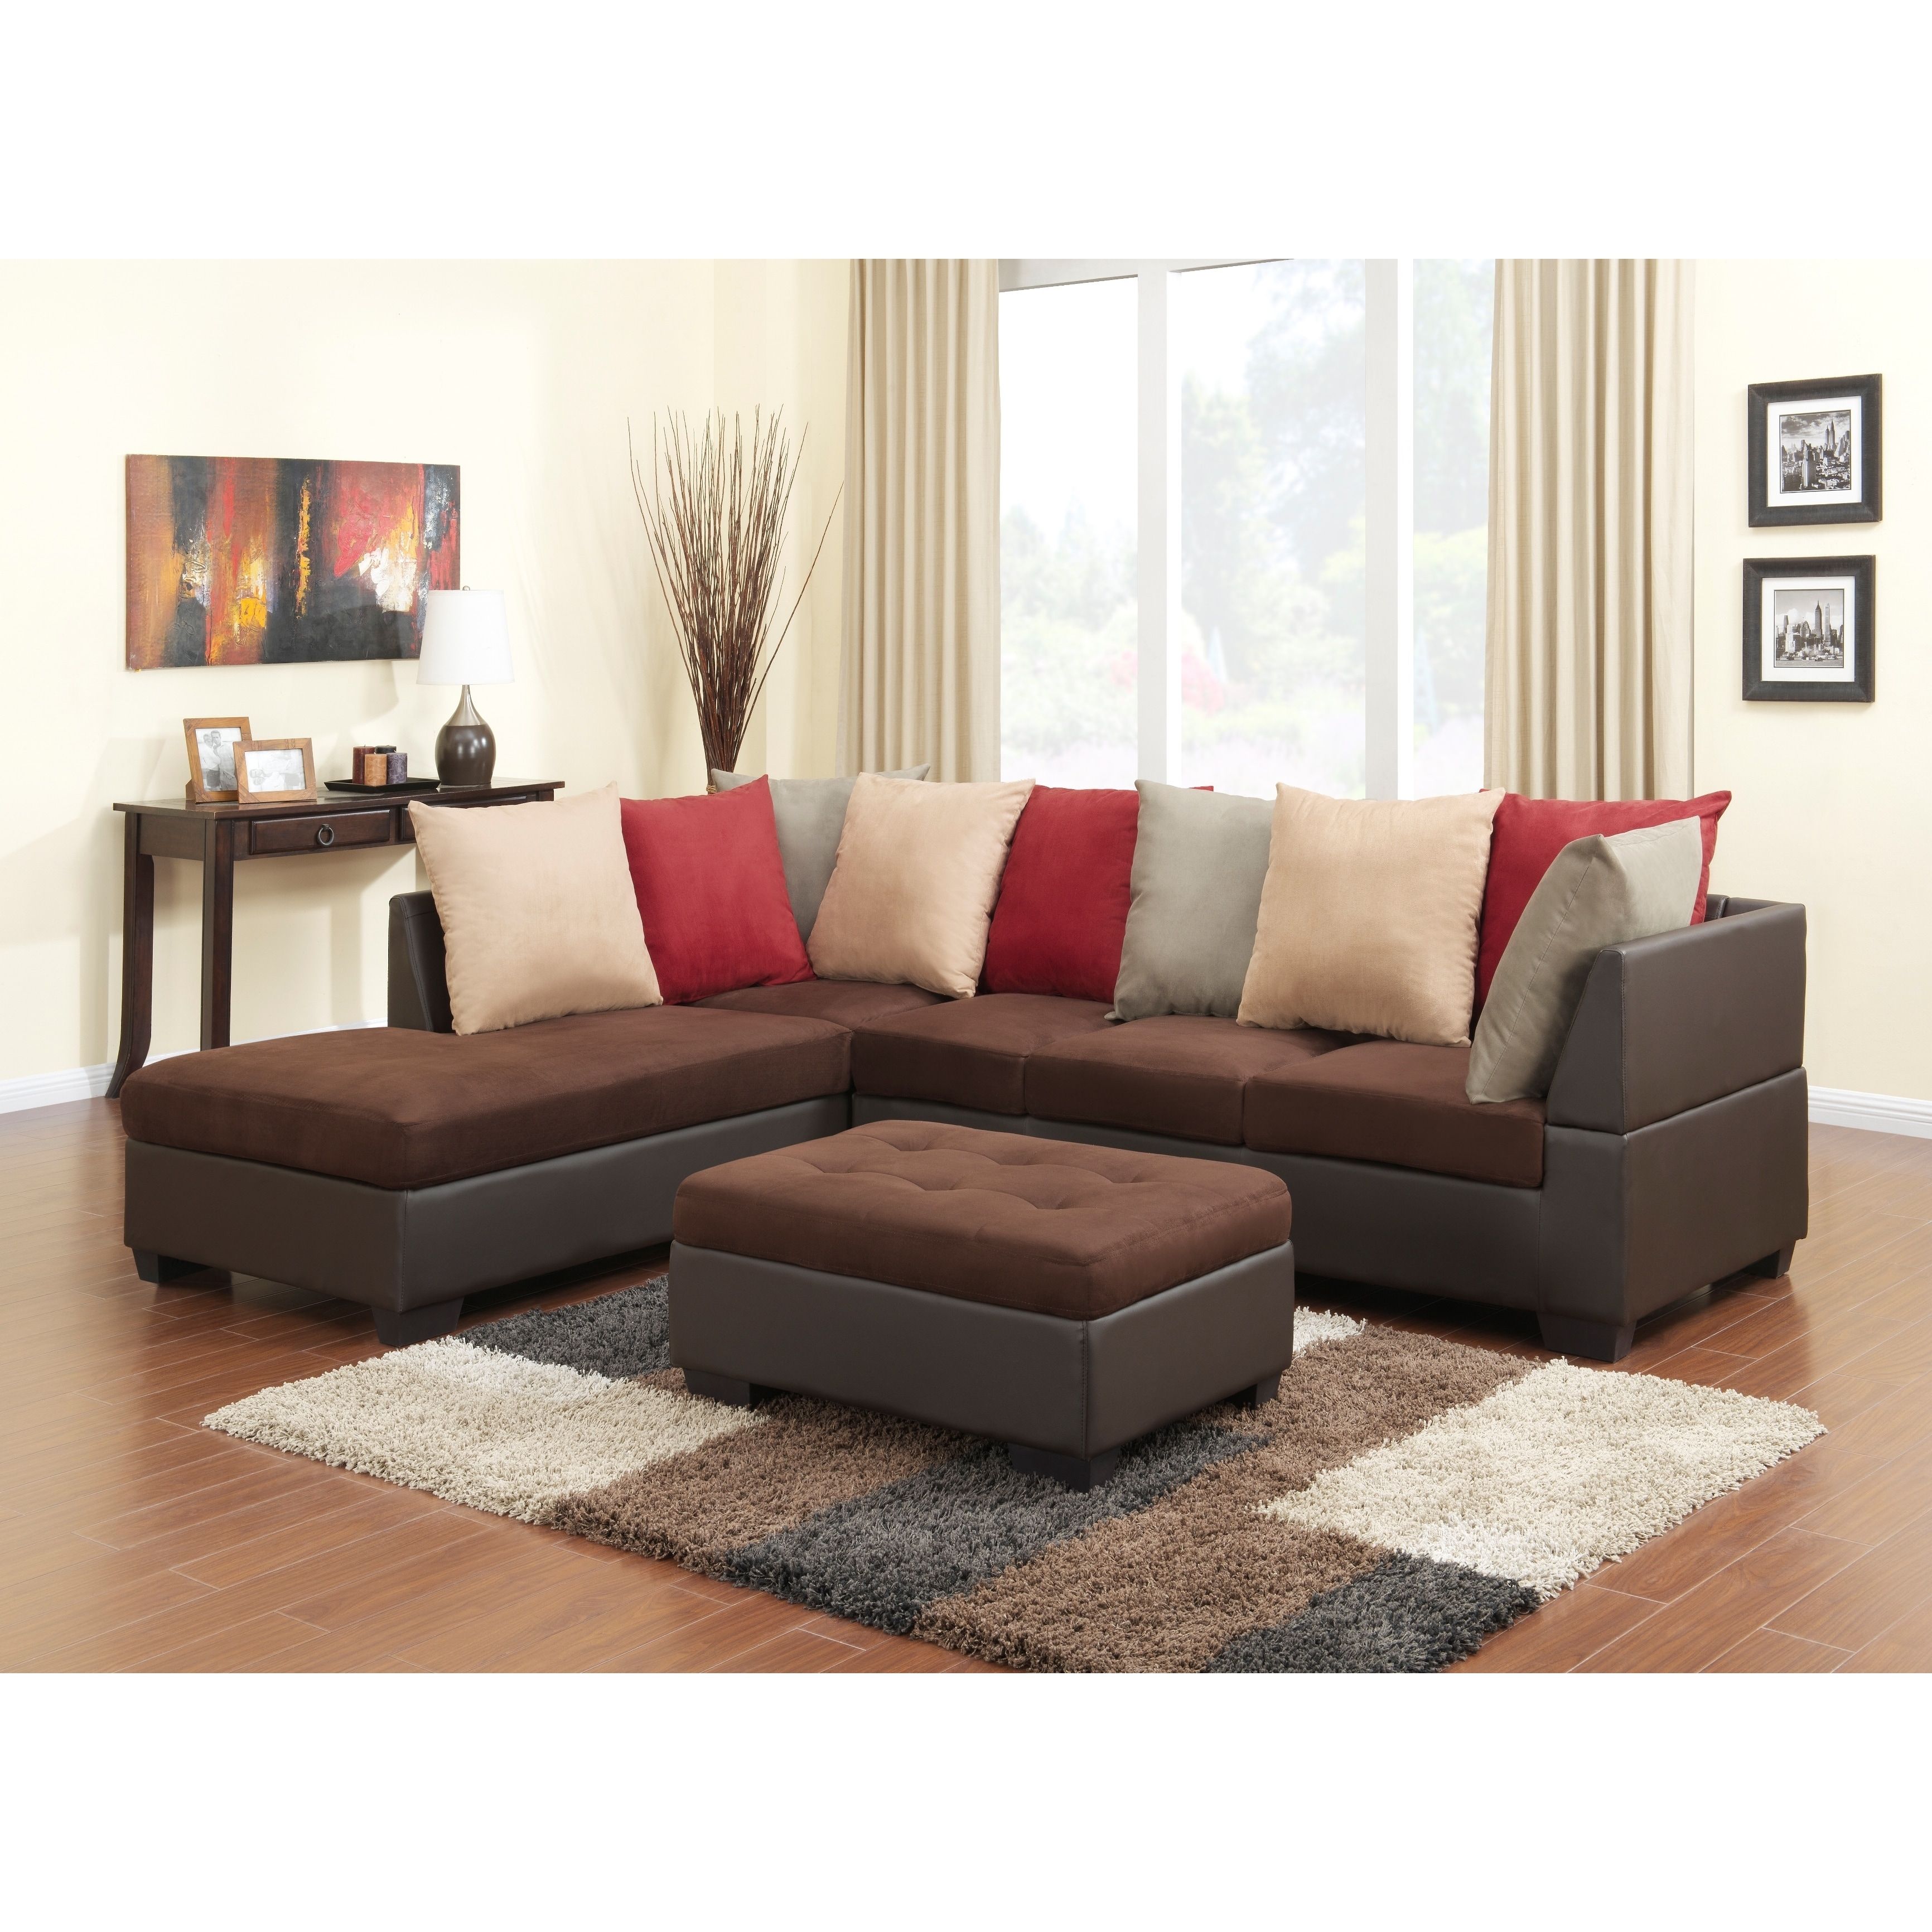 Microfiber Sectional Sofa With Scatter Back Pillows – – 9217012 With Pillowback Sofa Sectionals (View 9 of 20)